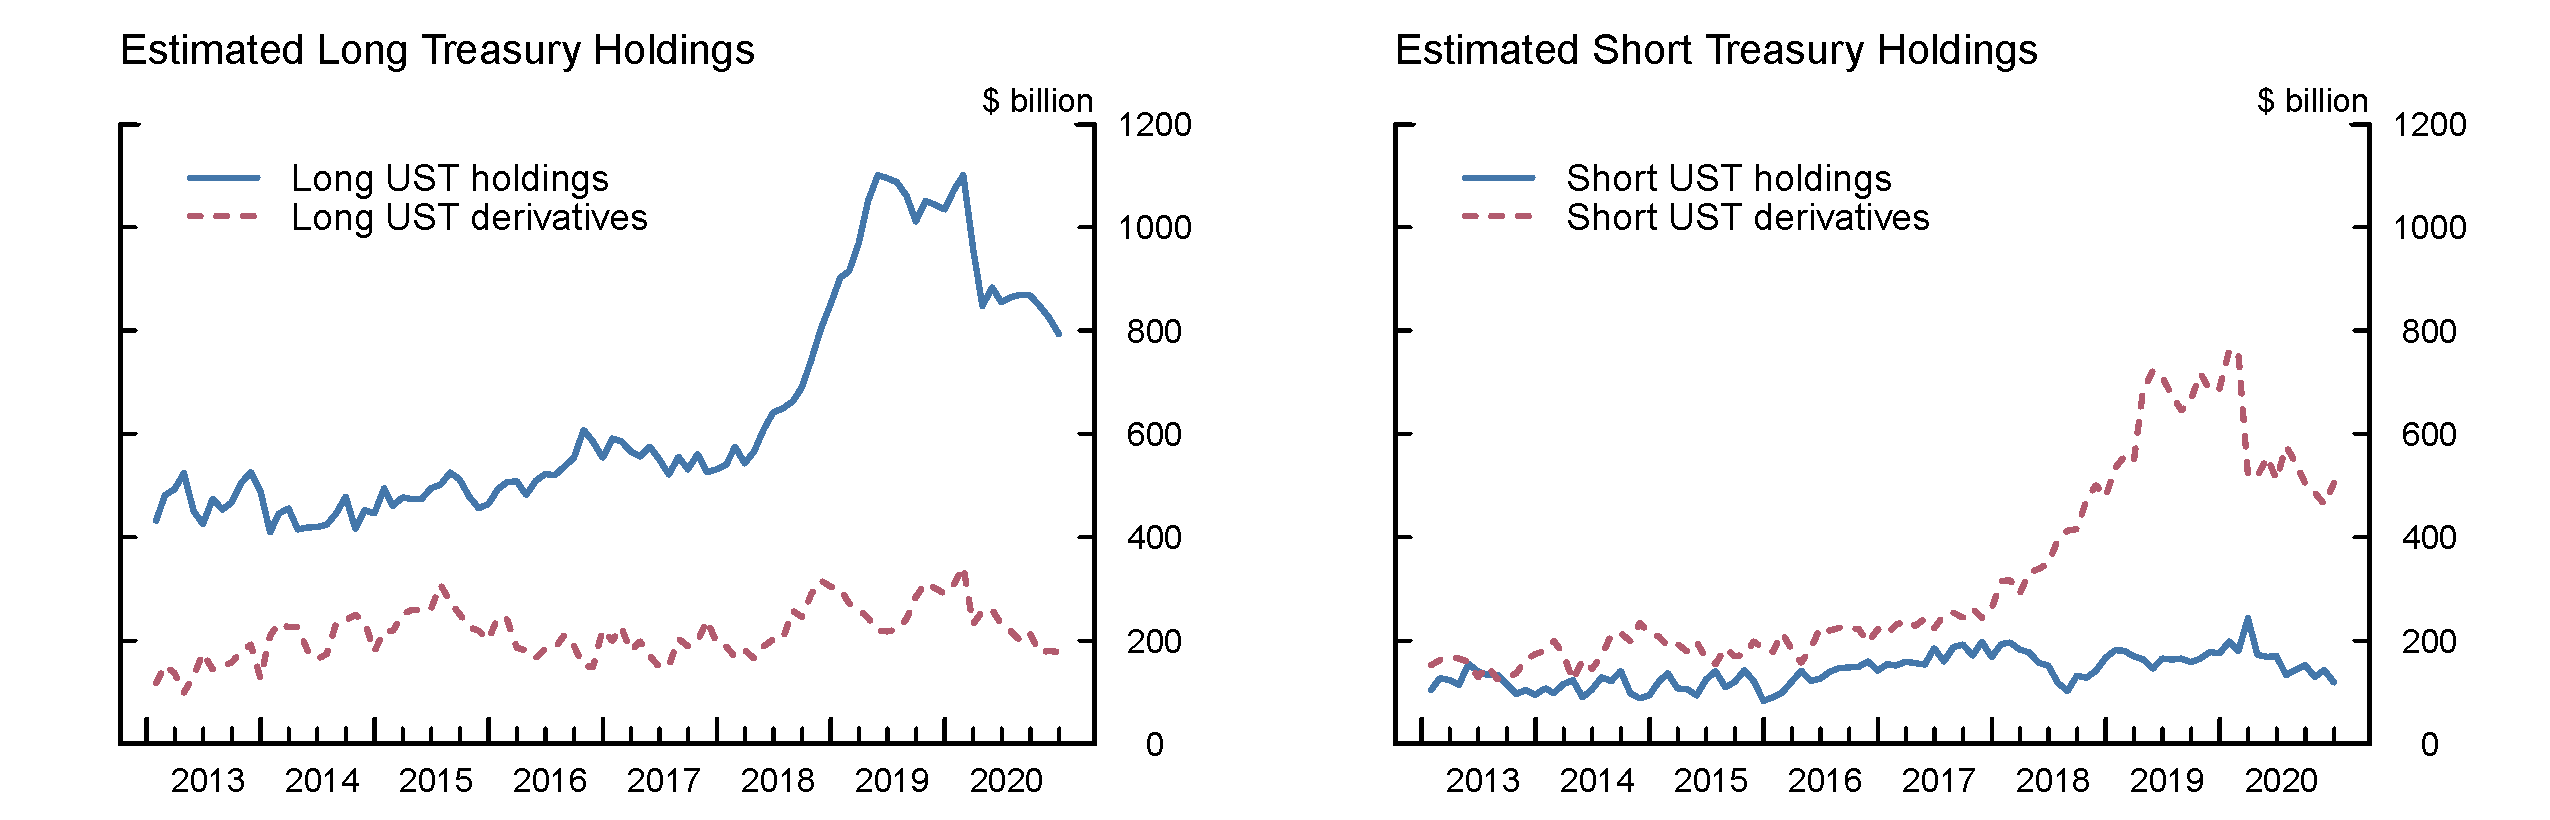 Figure 6. Estimated long and short Treasury holdings and derivatives positions. See accessible link for data.